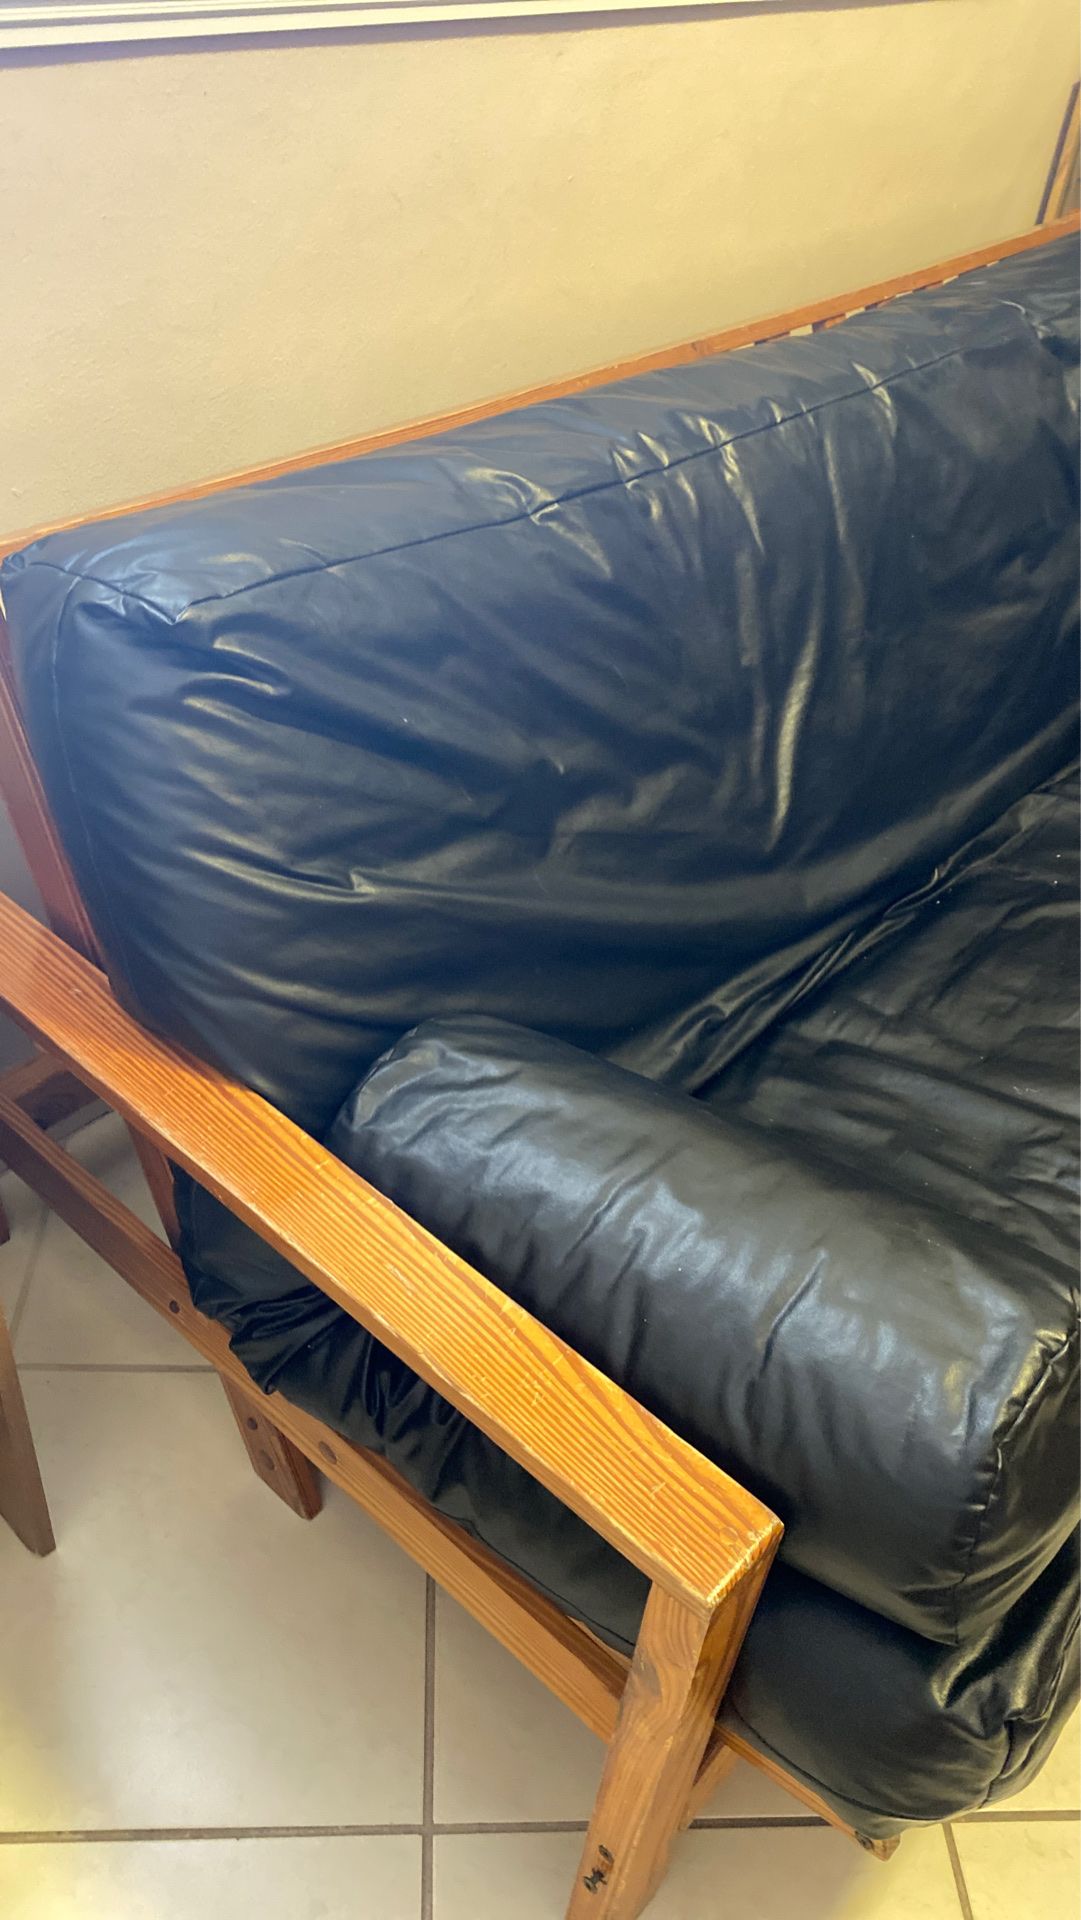 Futon with leather covering